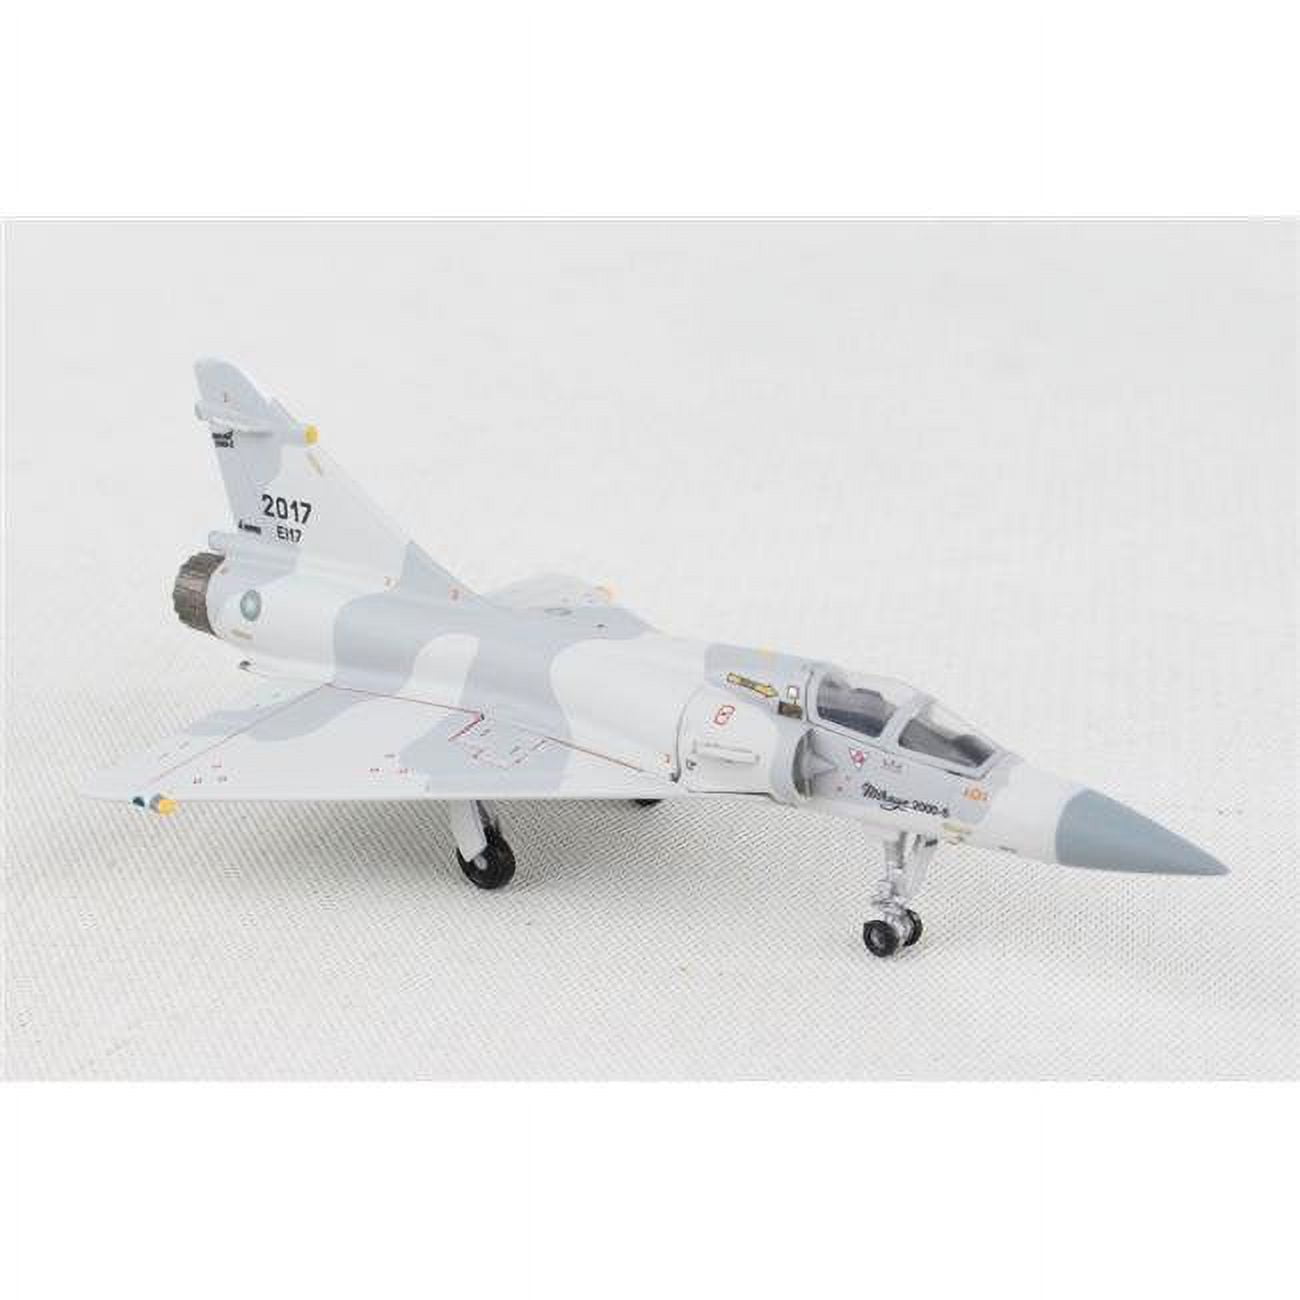 Hogan Wings Hg60548 1 By 200 Scale Rocaf Mirage 2000 Tail 2017 Model Airplane